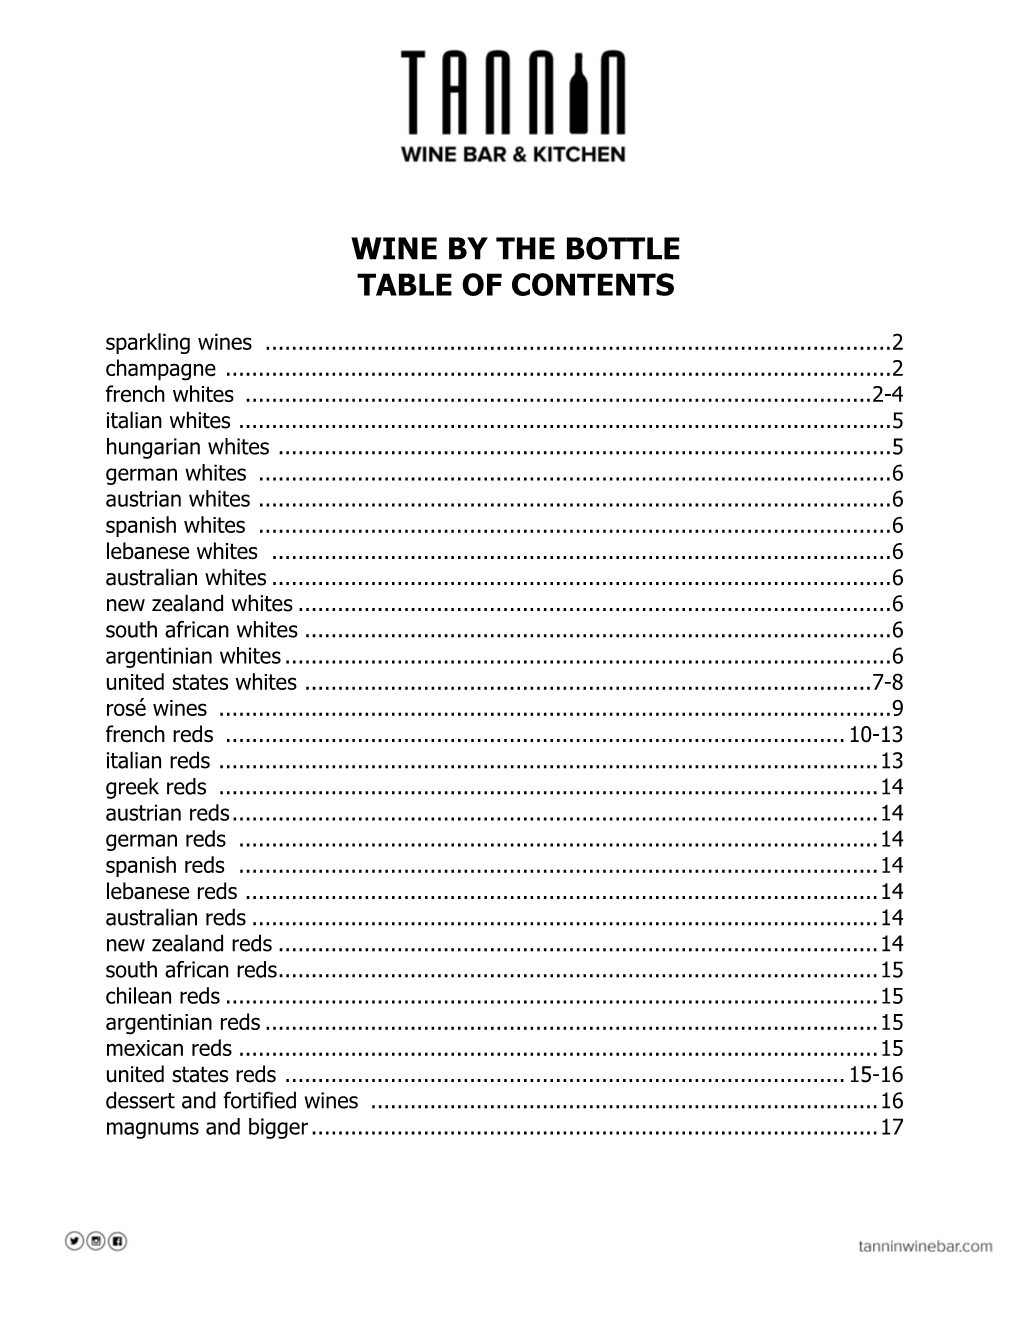 WINE by the BOTTLE TABLE of CONTENTS Sparkling Wines